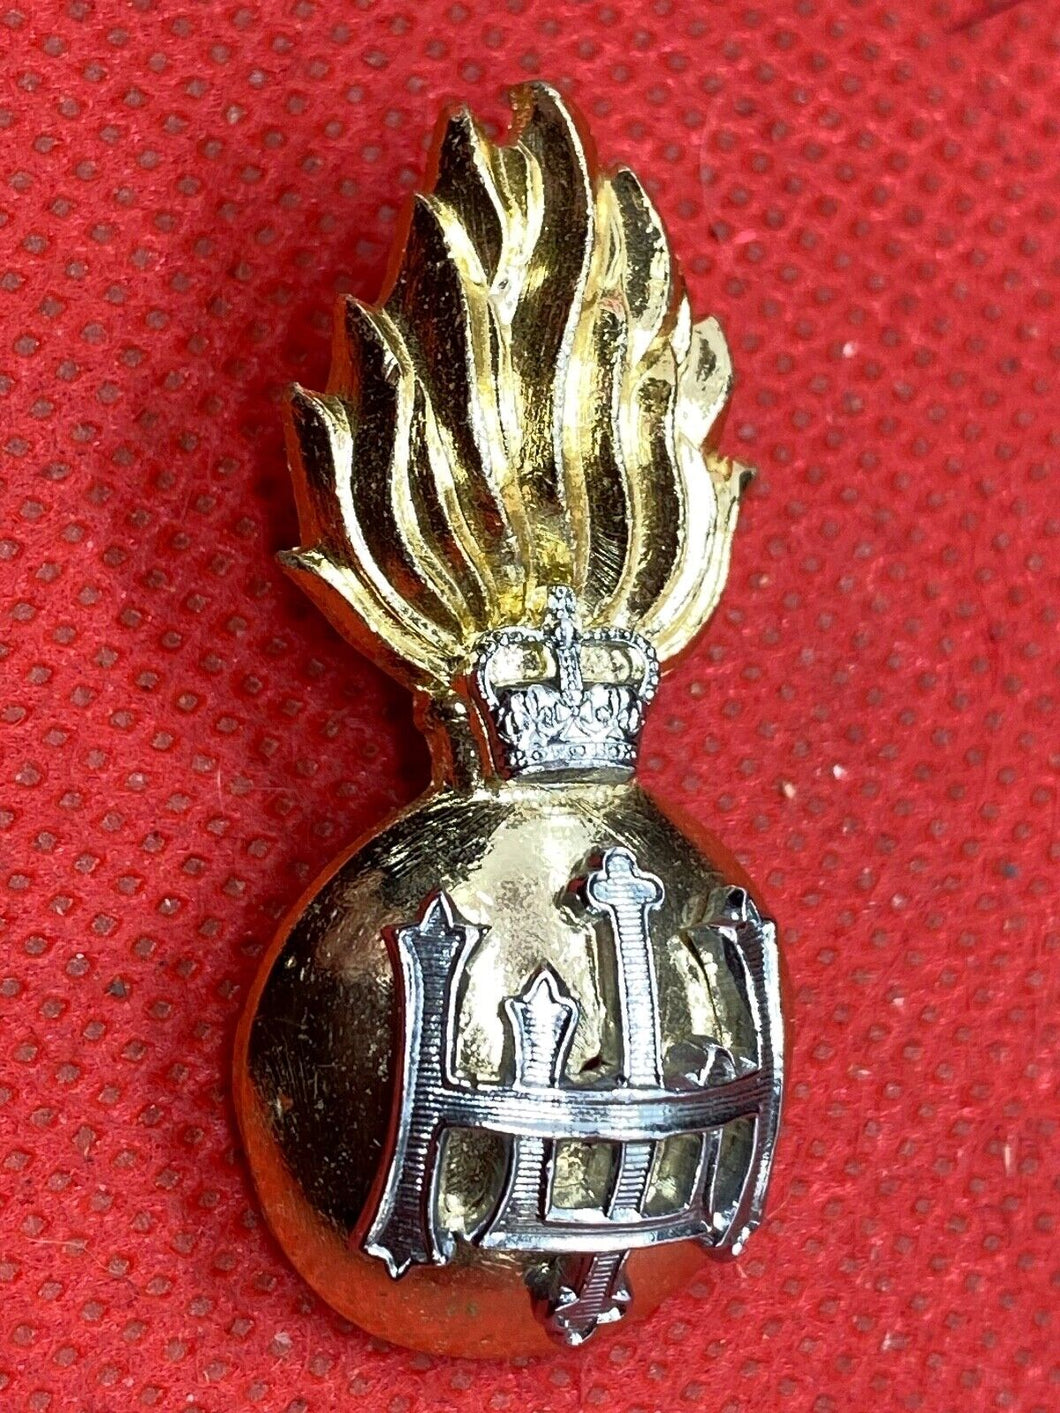 Original British Army The Royal Highland Fusiliers HLI Queen's Crown Cap Badge